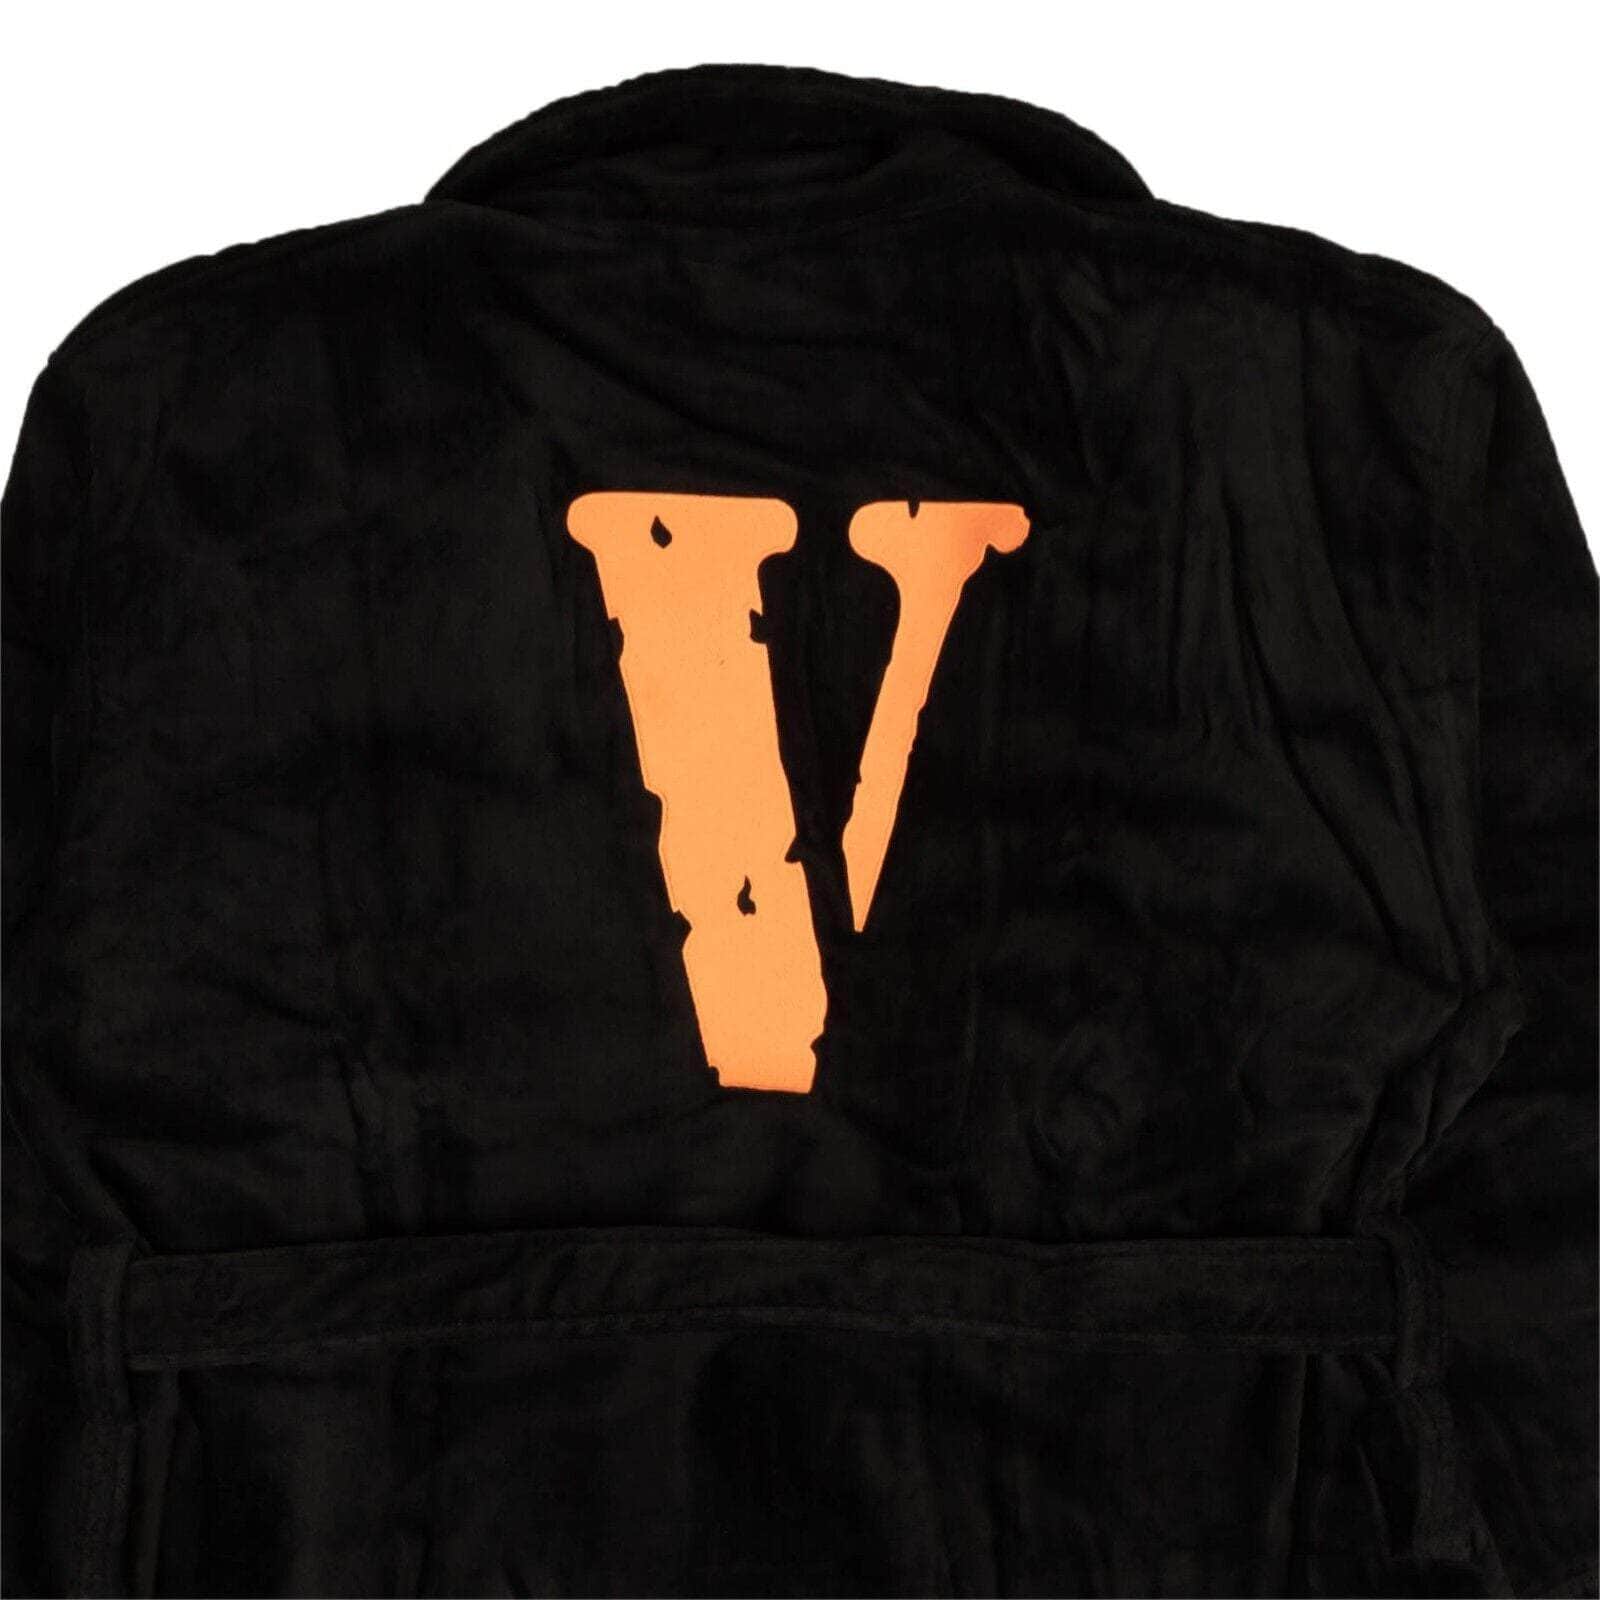 Vlone 2000-5000, channelenable-all, chicmi, couponcollection, gender-mens, main-clothing, mens-shoes, mens-sleepwear-robes, size-os, vlone OS Black And Orange Logo Terry Bathrobe 95-VLN-0001/OS 95-VLN-0001/OS